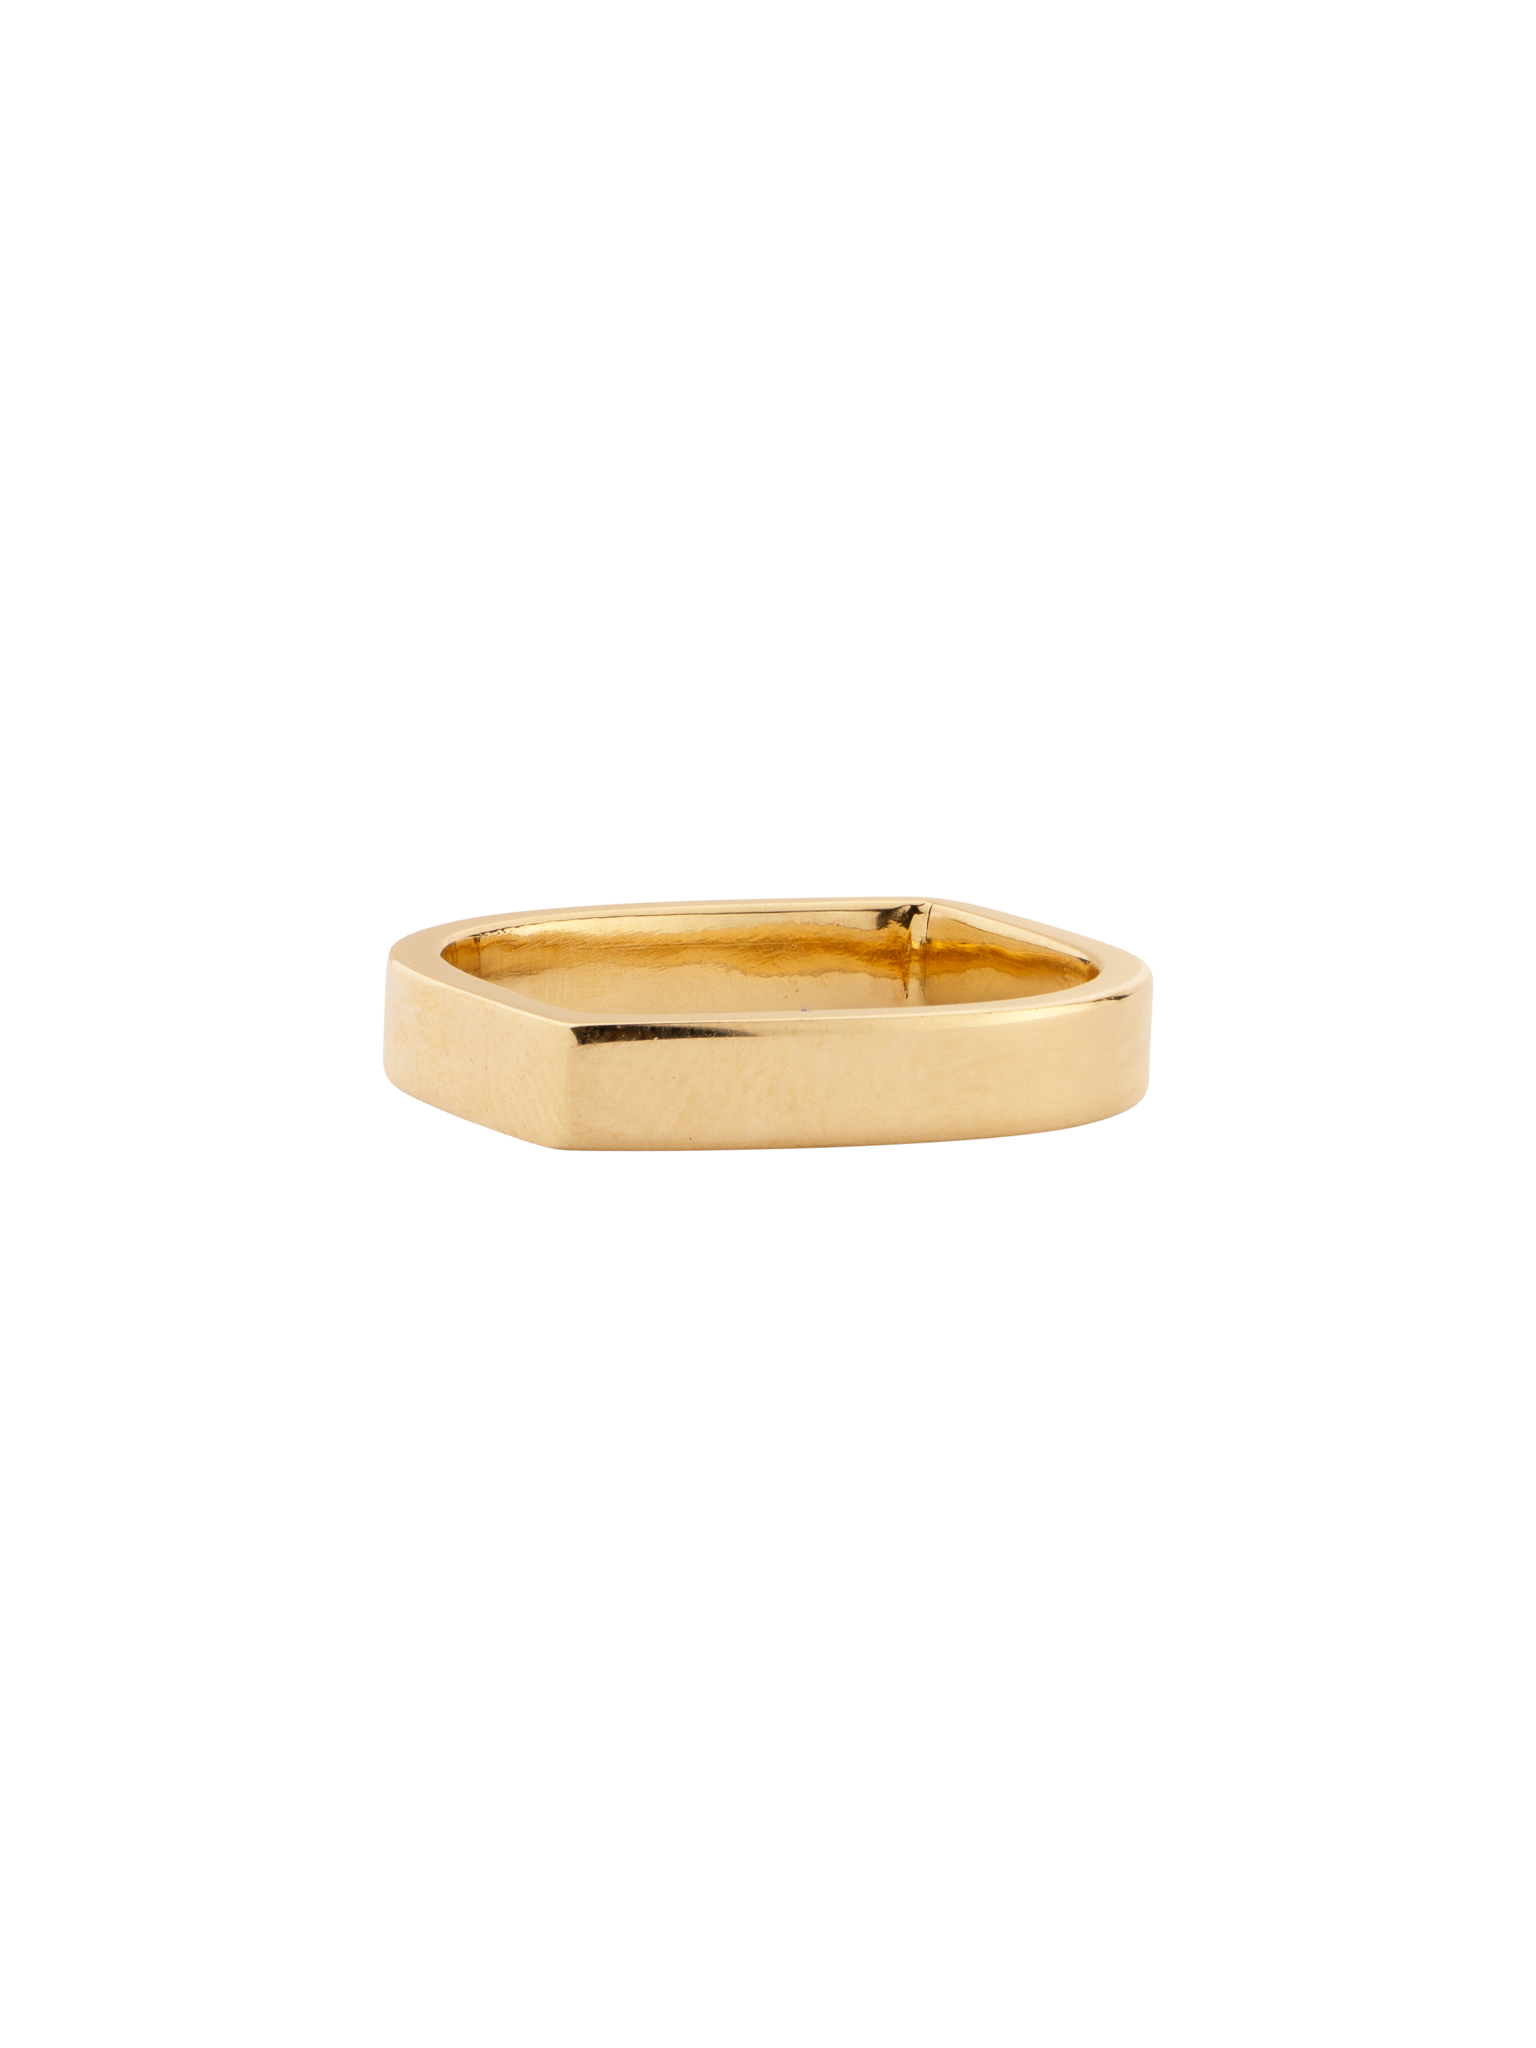 Sculpture ring in 14kt gold